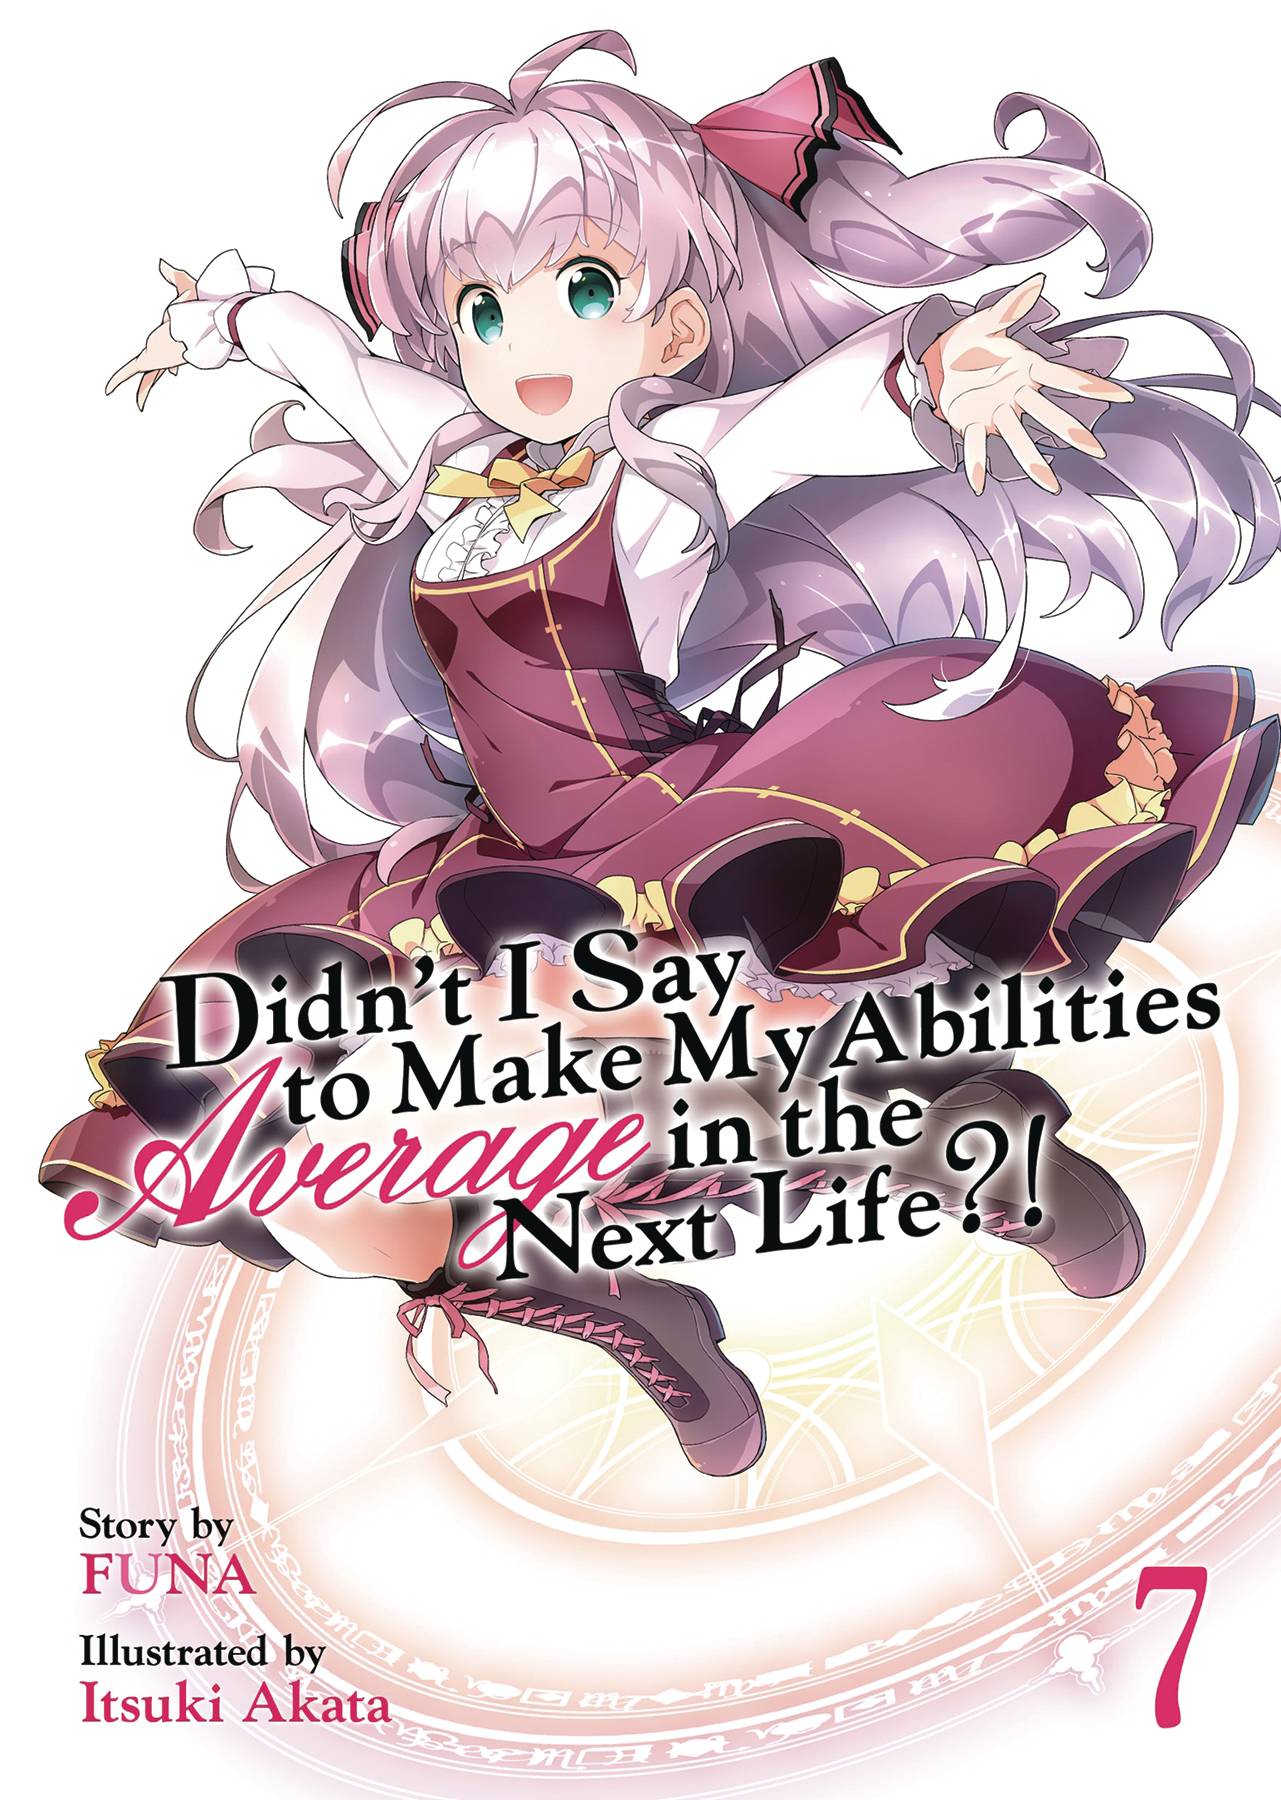 Didn't I Say to Make My Abilities Average in the Next Life?! Light Novel Volume 7 (Mature)